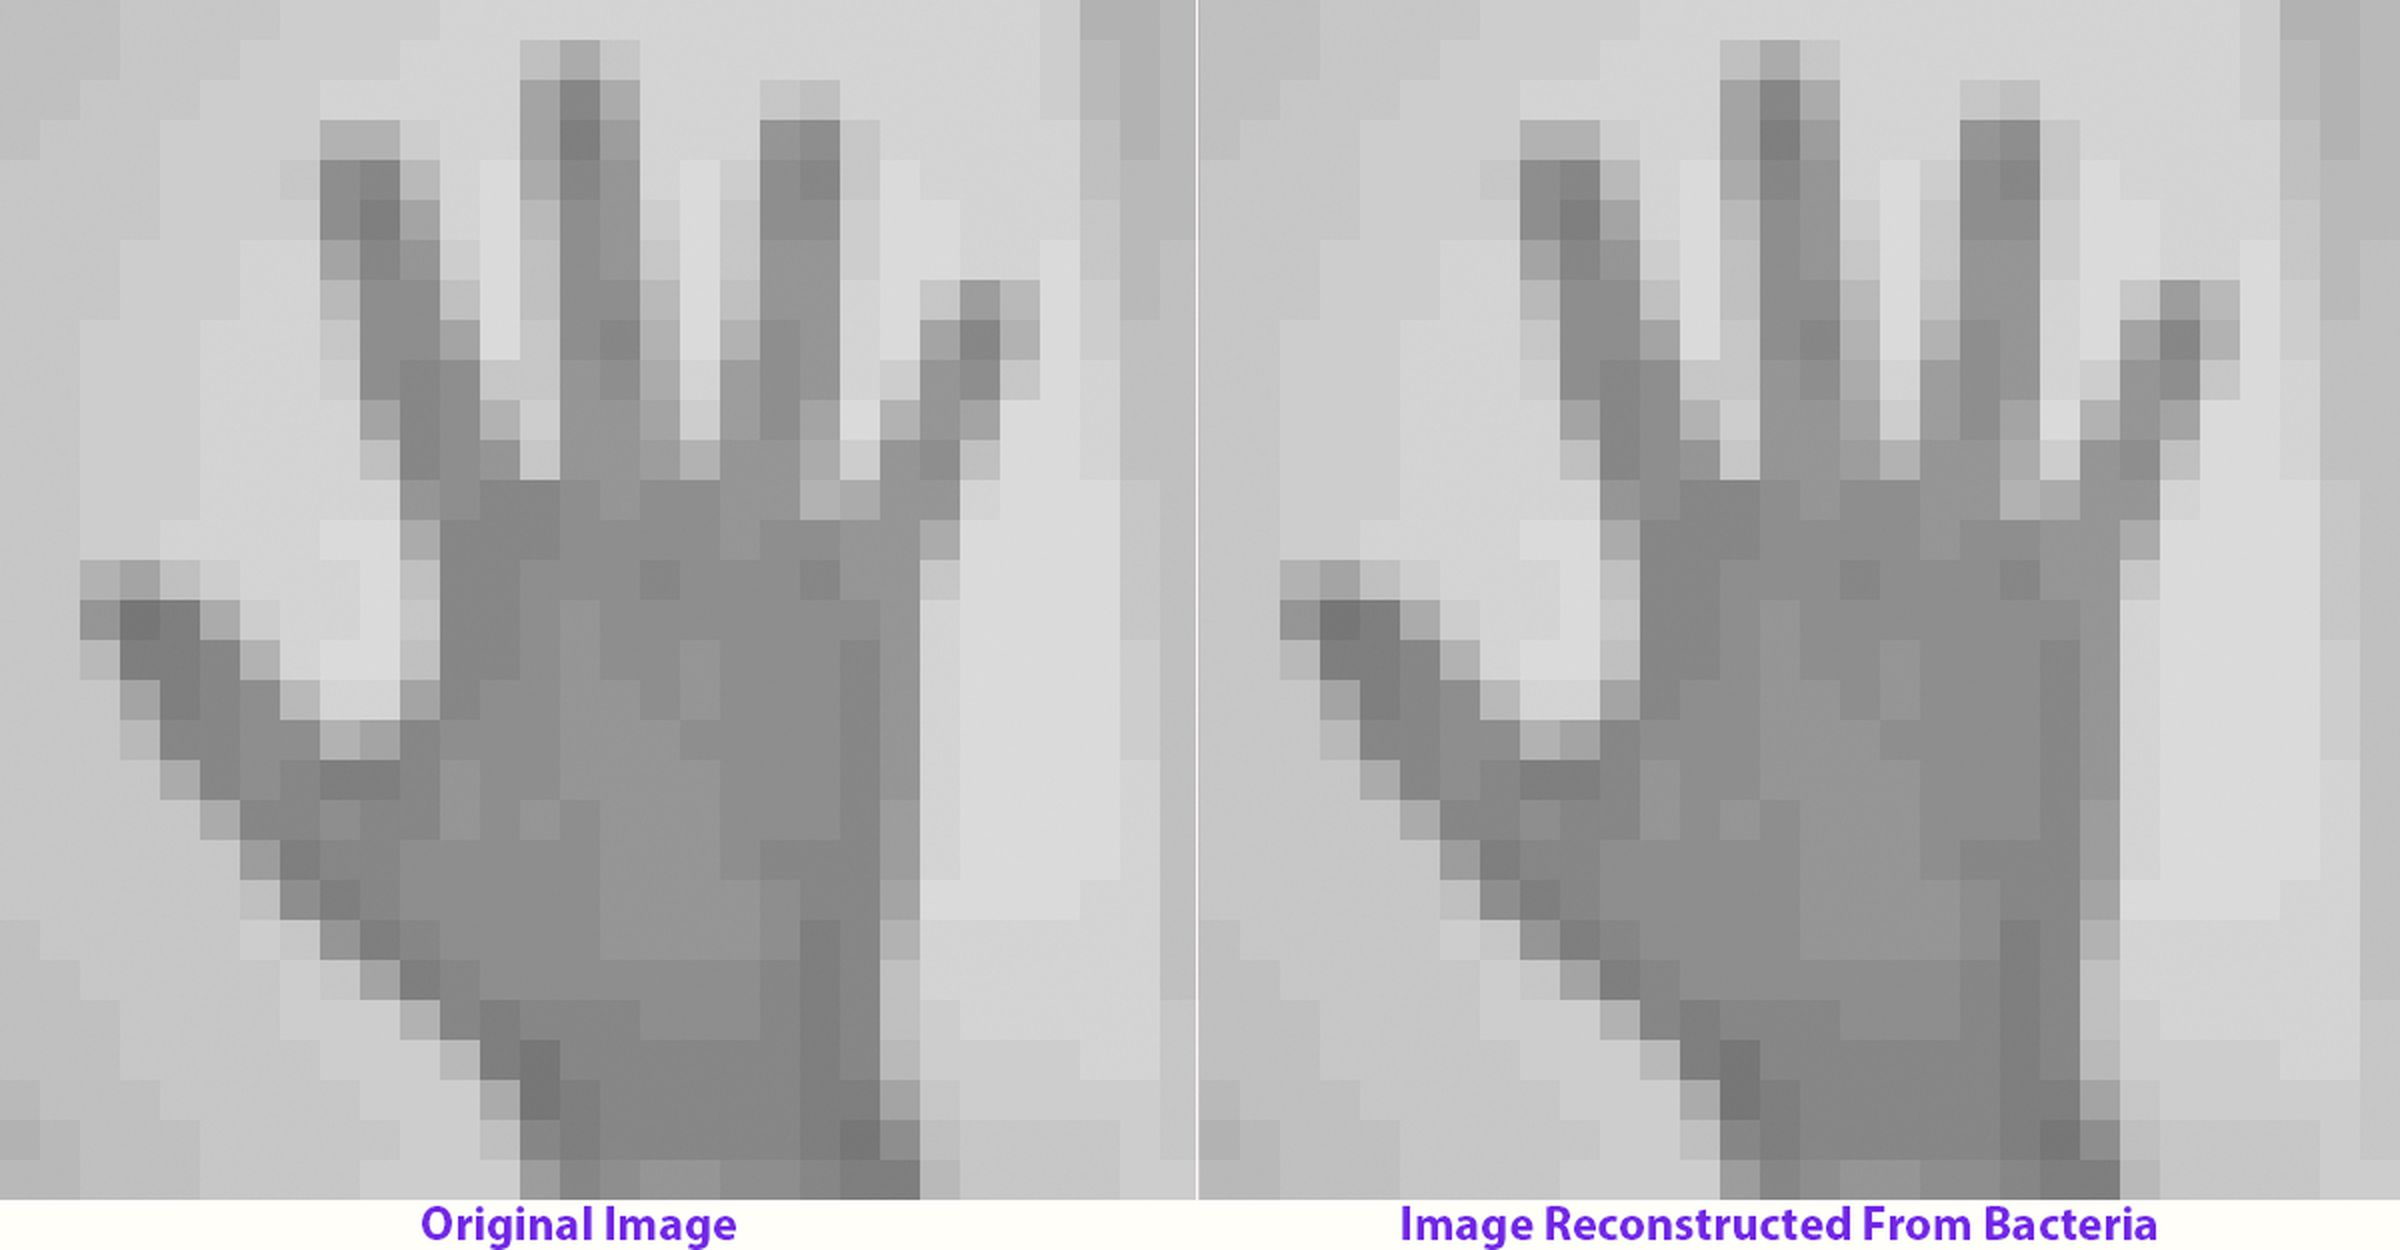 To the left is an image of a human hand, which was encoded into nucleotides and captured by the CRISPR-Cas adaptation system in living bacteria. To the right is the image after multiple generations of bacterial growth, recovered by sequencing bacterial genomes.